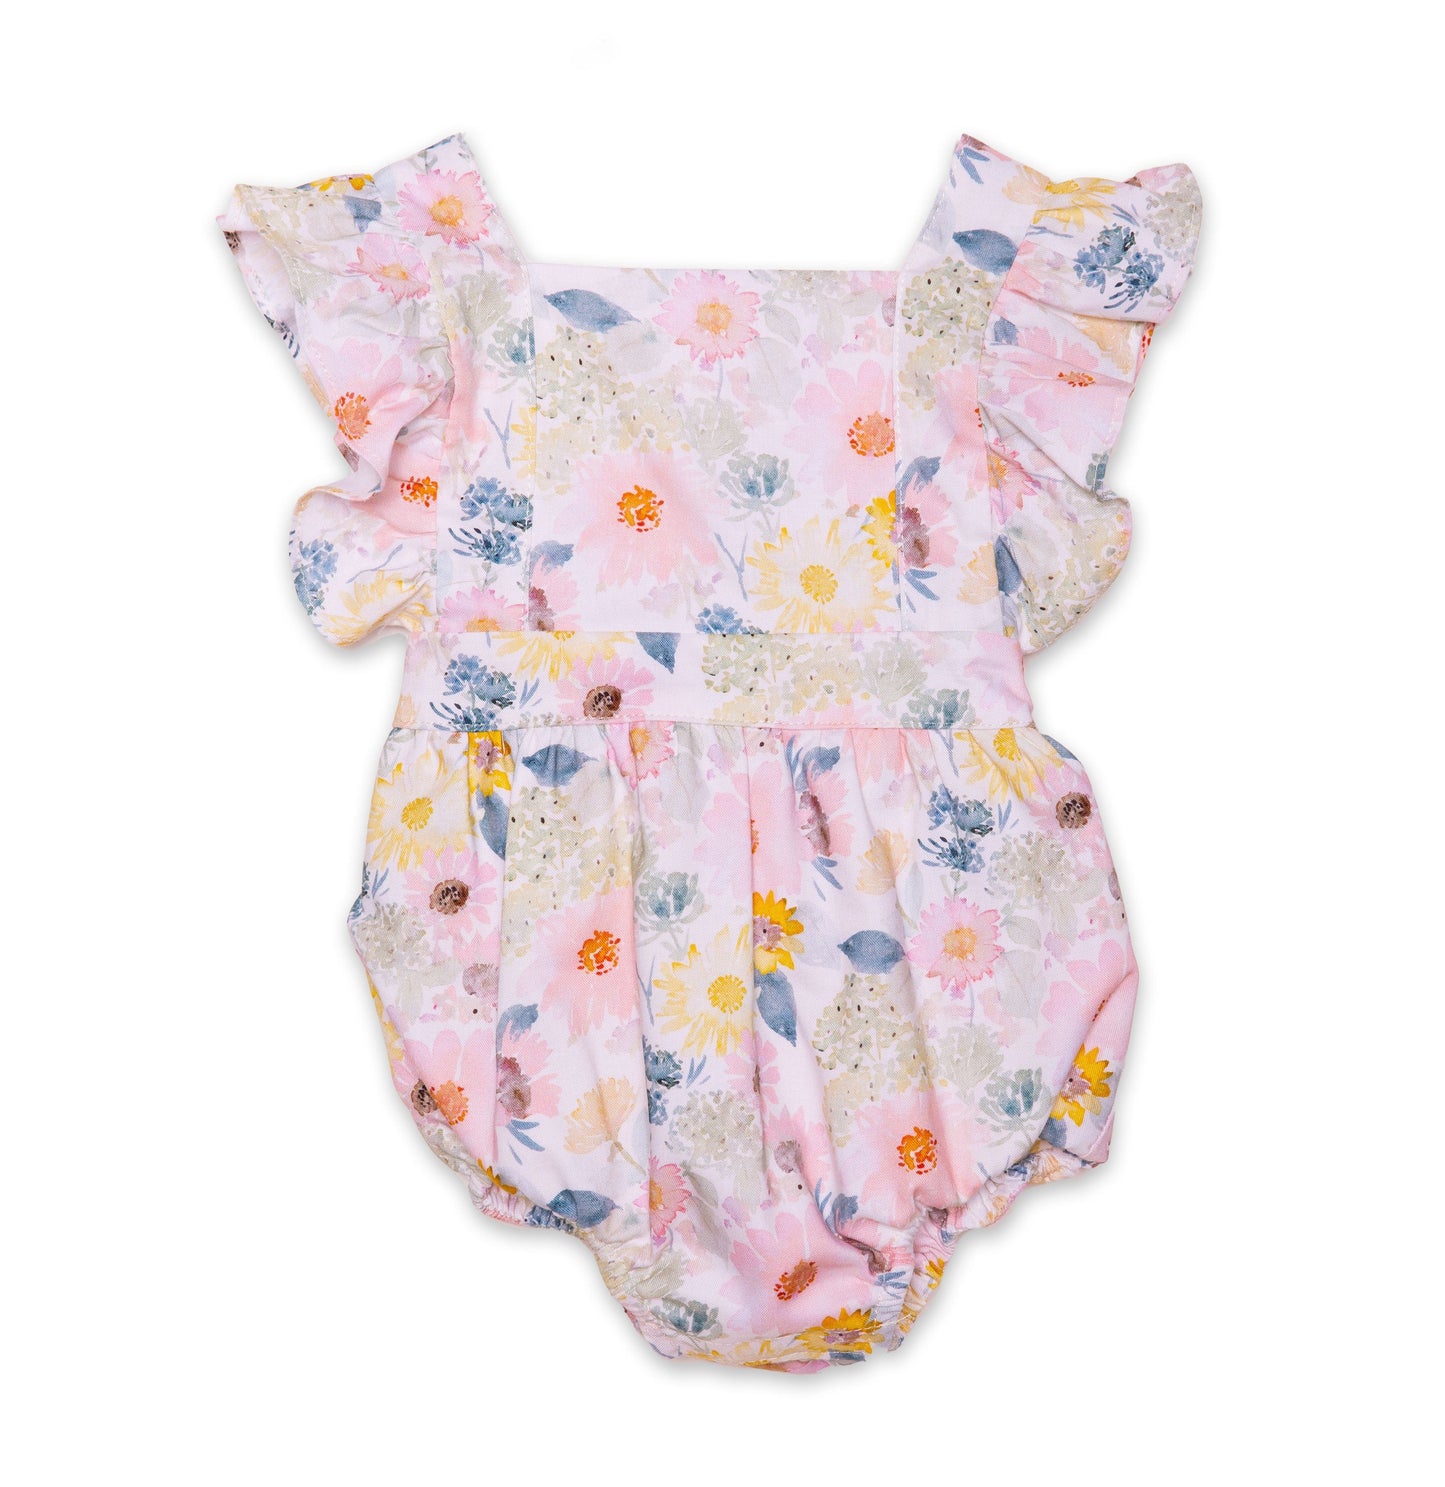 Worthy Threads Blooming Bubble Romper